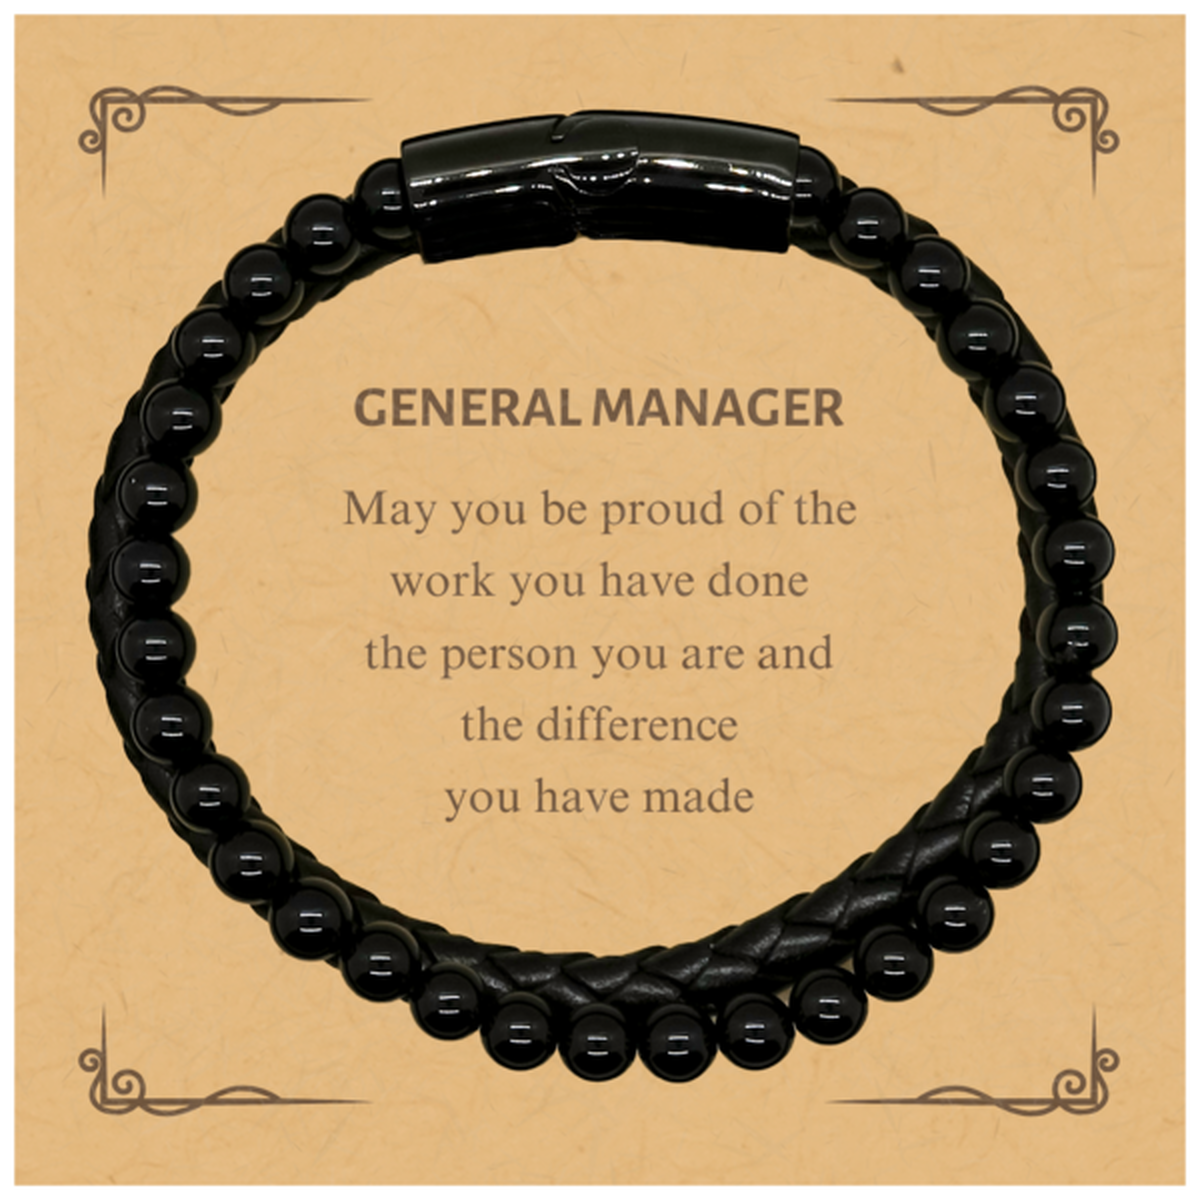 General Manager May you be proud of the work you have done, Retirement General Manager Stone Leather Bracelets for Colleague Appreciation Gifts Amazing for General Manager